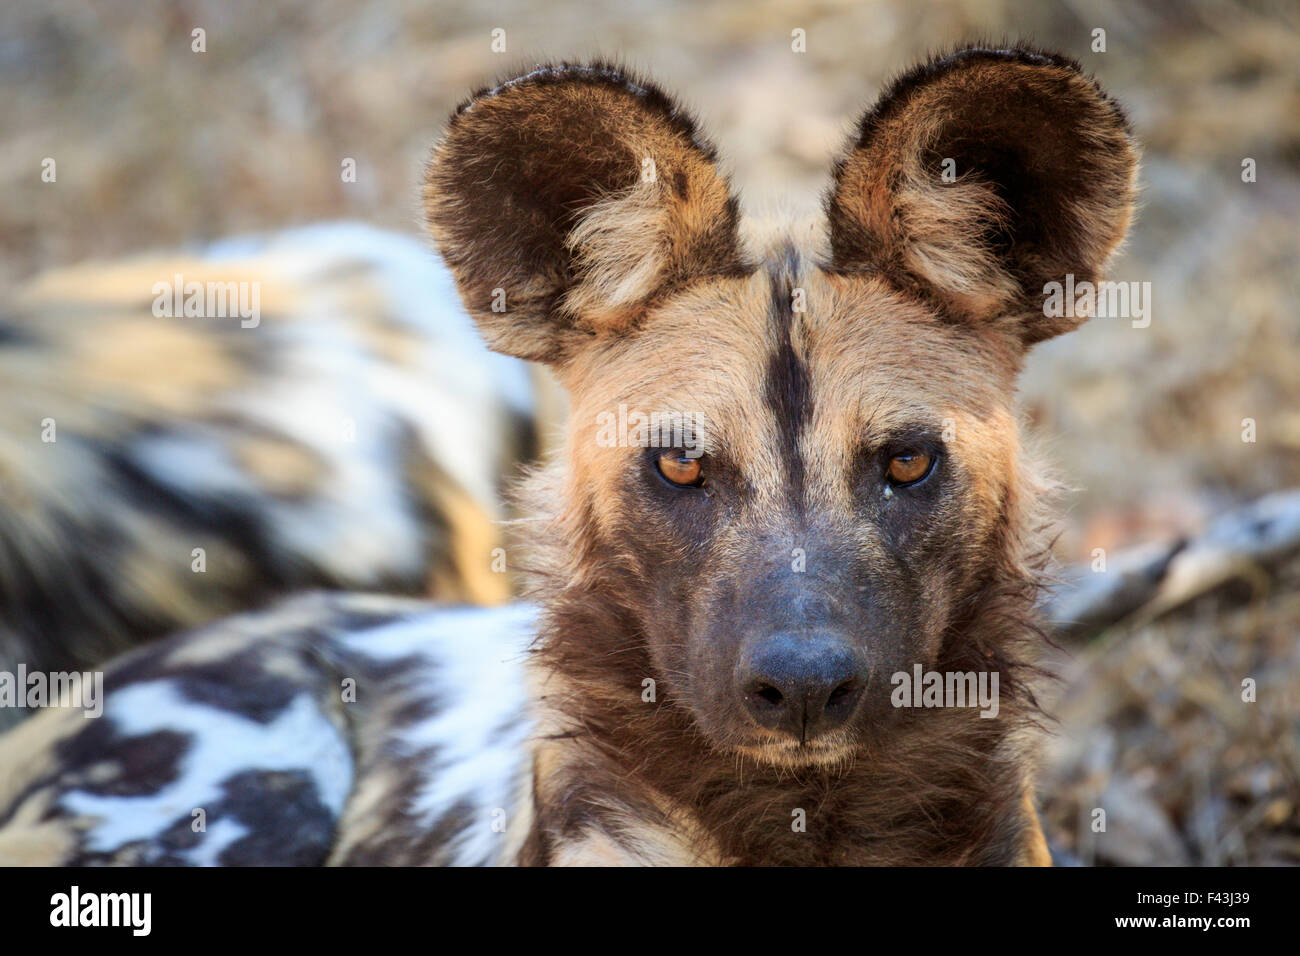 African wild dog (Lyacon pictus), South Luangwa National Park, Sambia Stock Photo